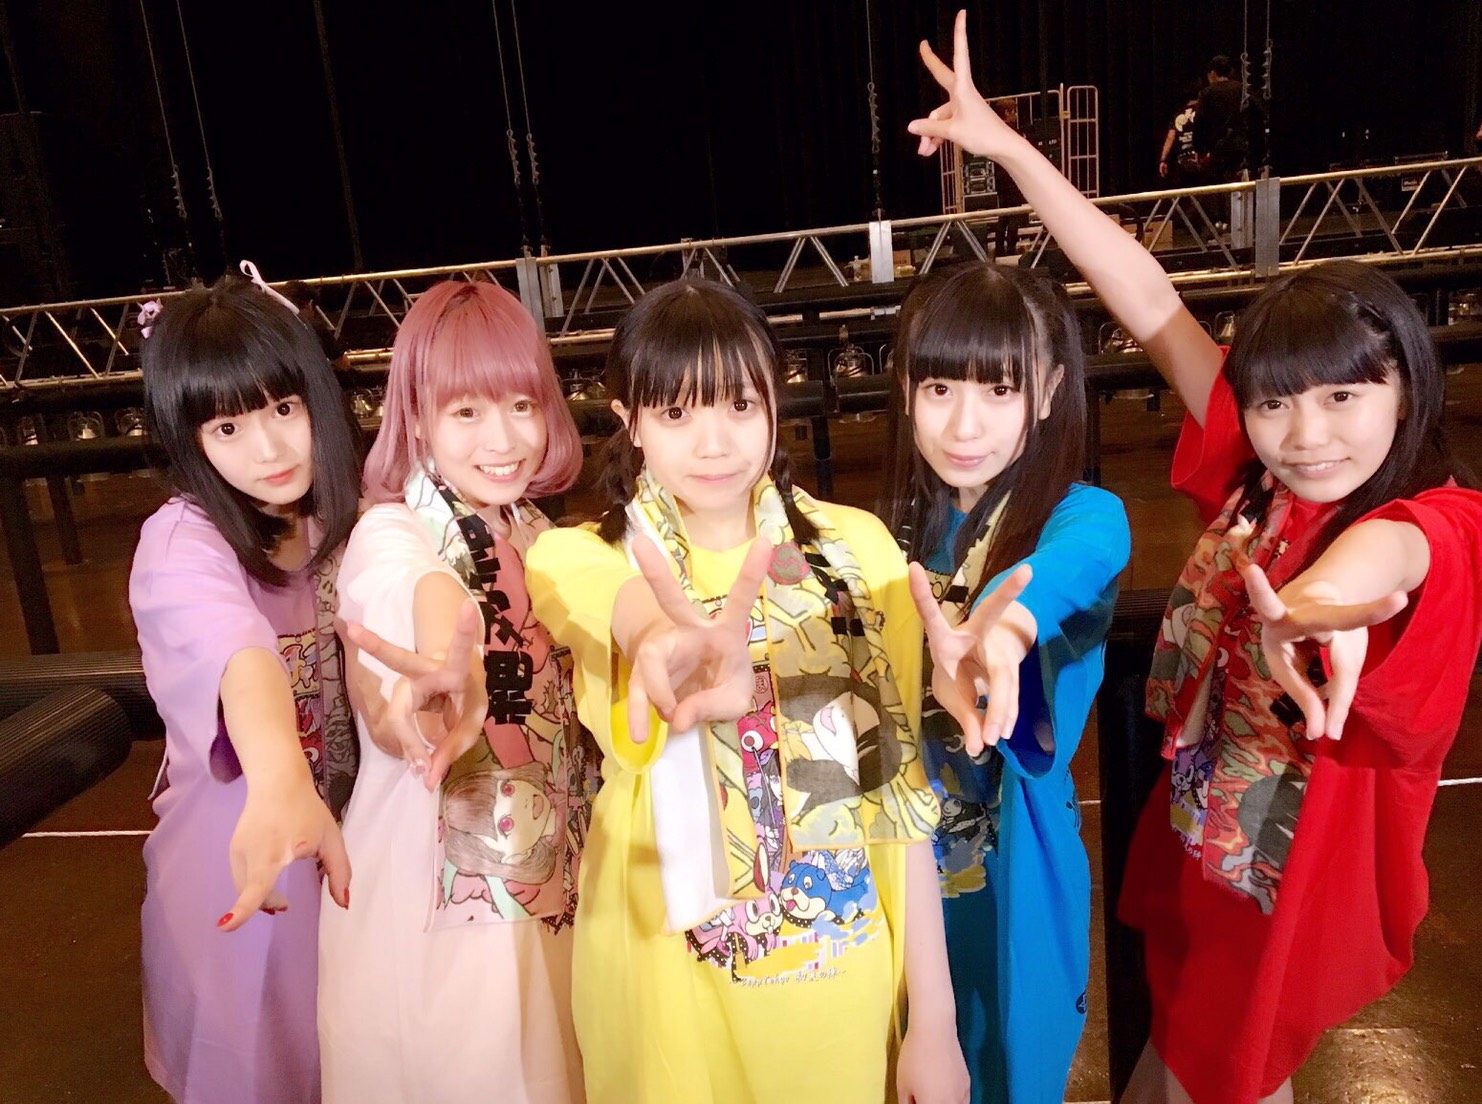 Filled with Lots of Kecha! Maneki Kecha Overwhelmed the Audience at Their Solo Concert at Zepp Tokyo